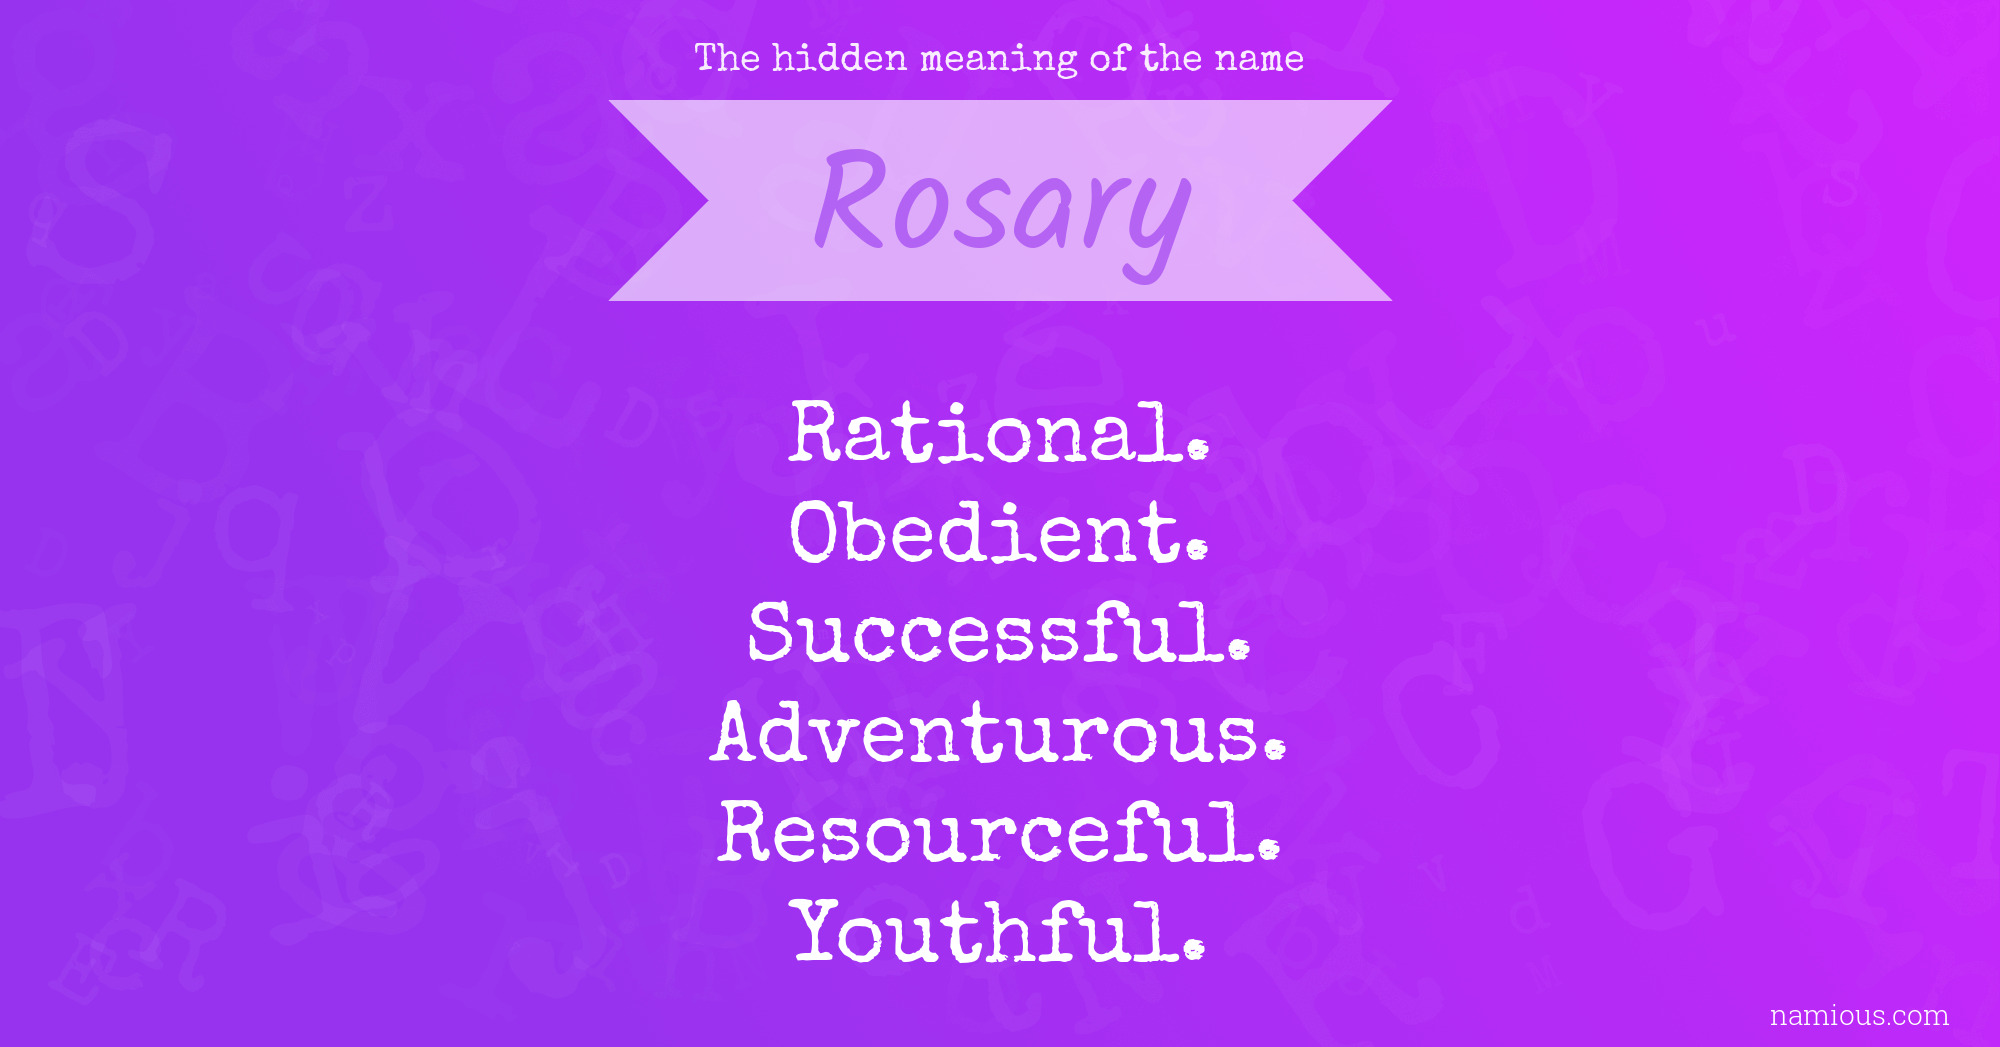 The hidden meaning of the name Rosary